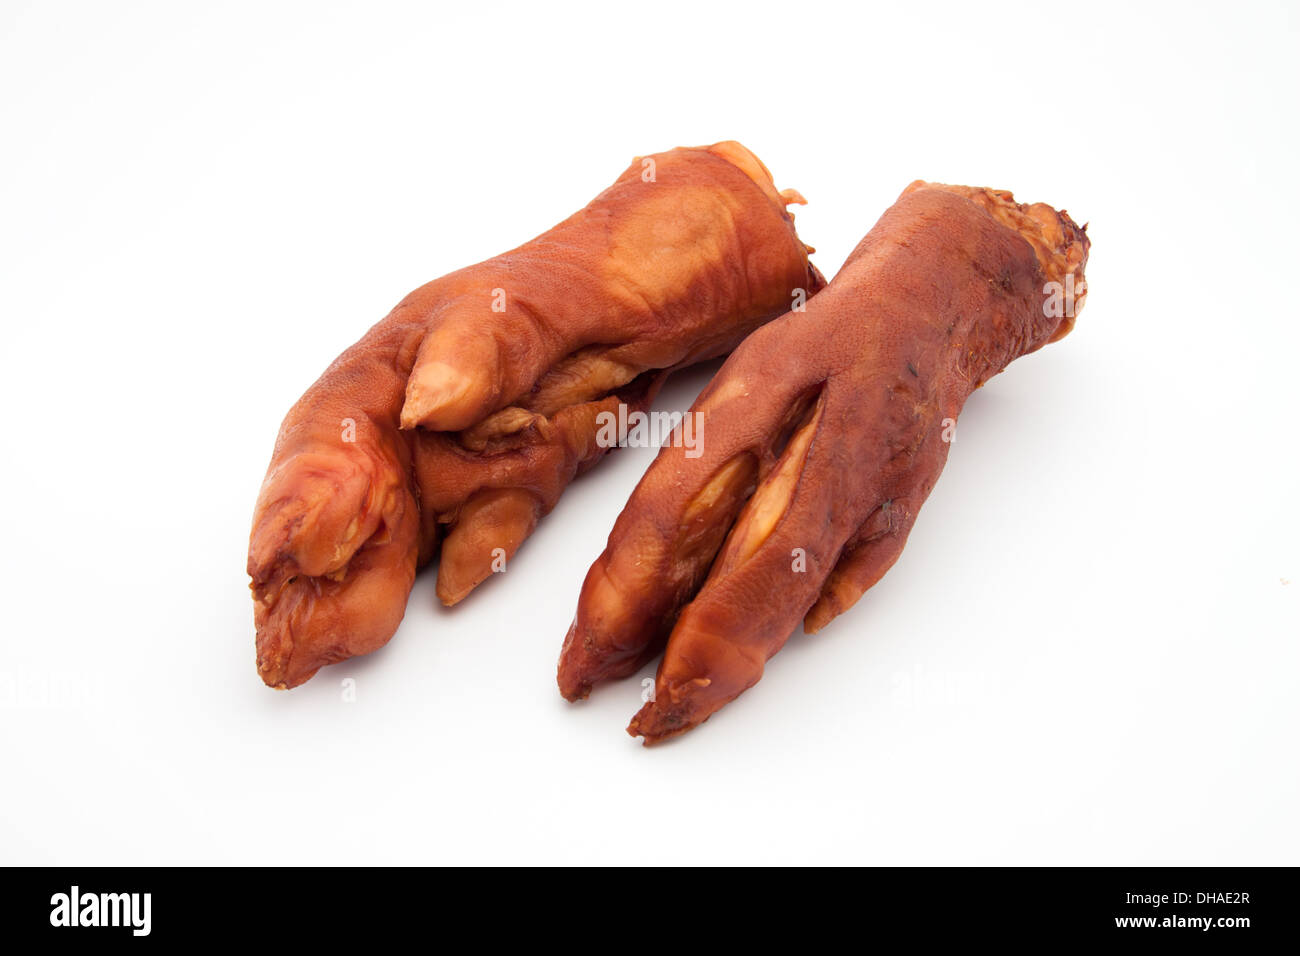 Dry smoked pork  trotters on white background Stock Photo